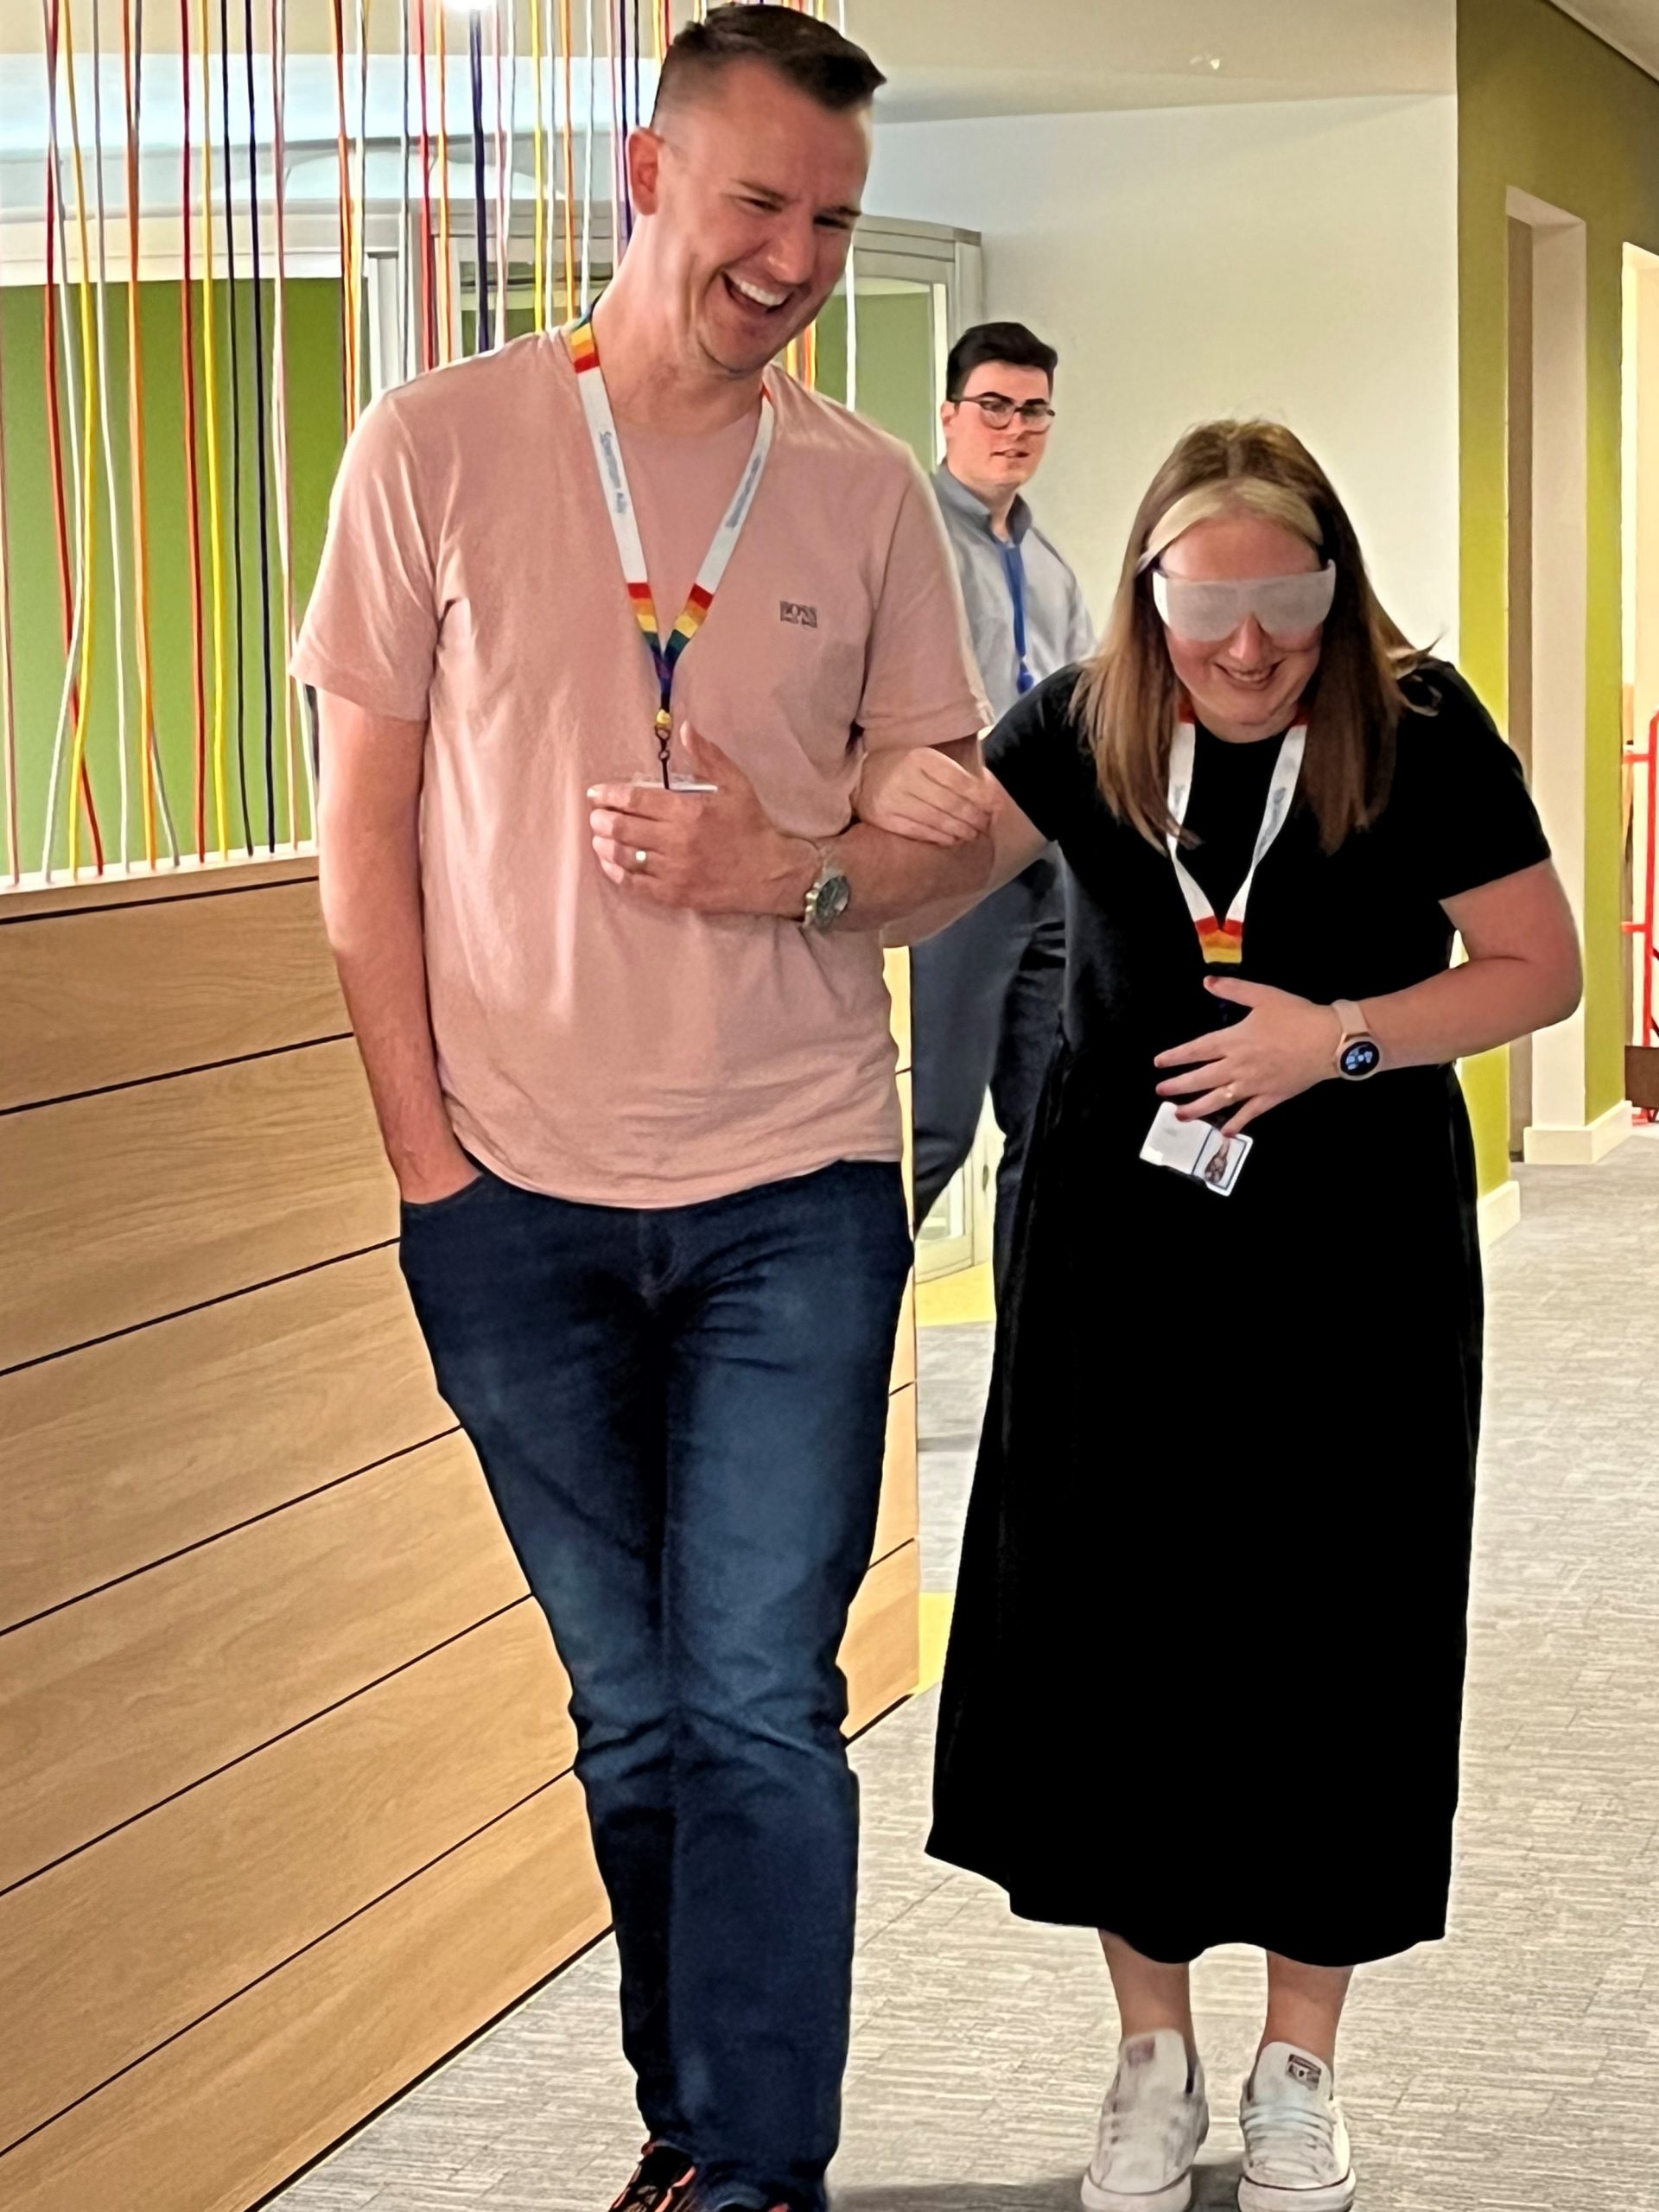 Two members from Barclays during the sighted guide training. One is wearing sim specs, whilst being guided by the other.